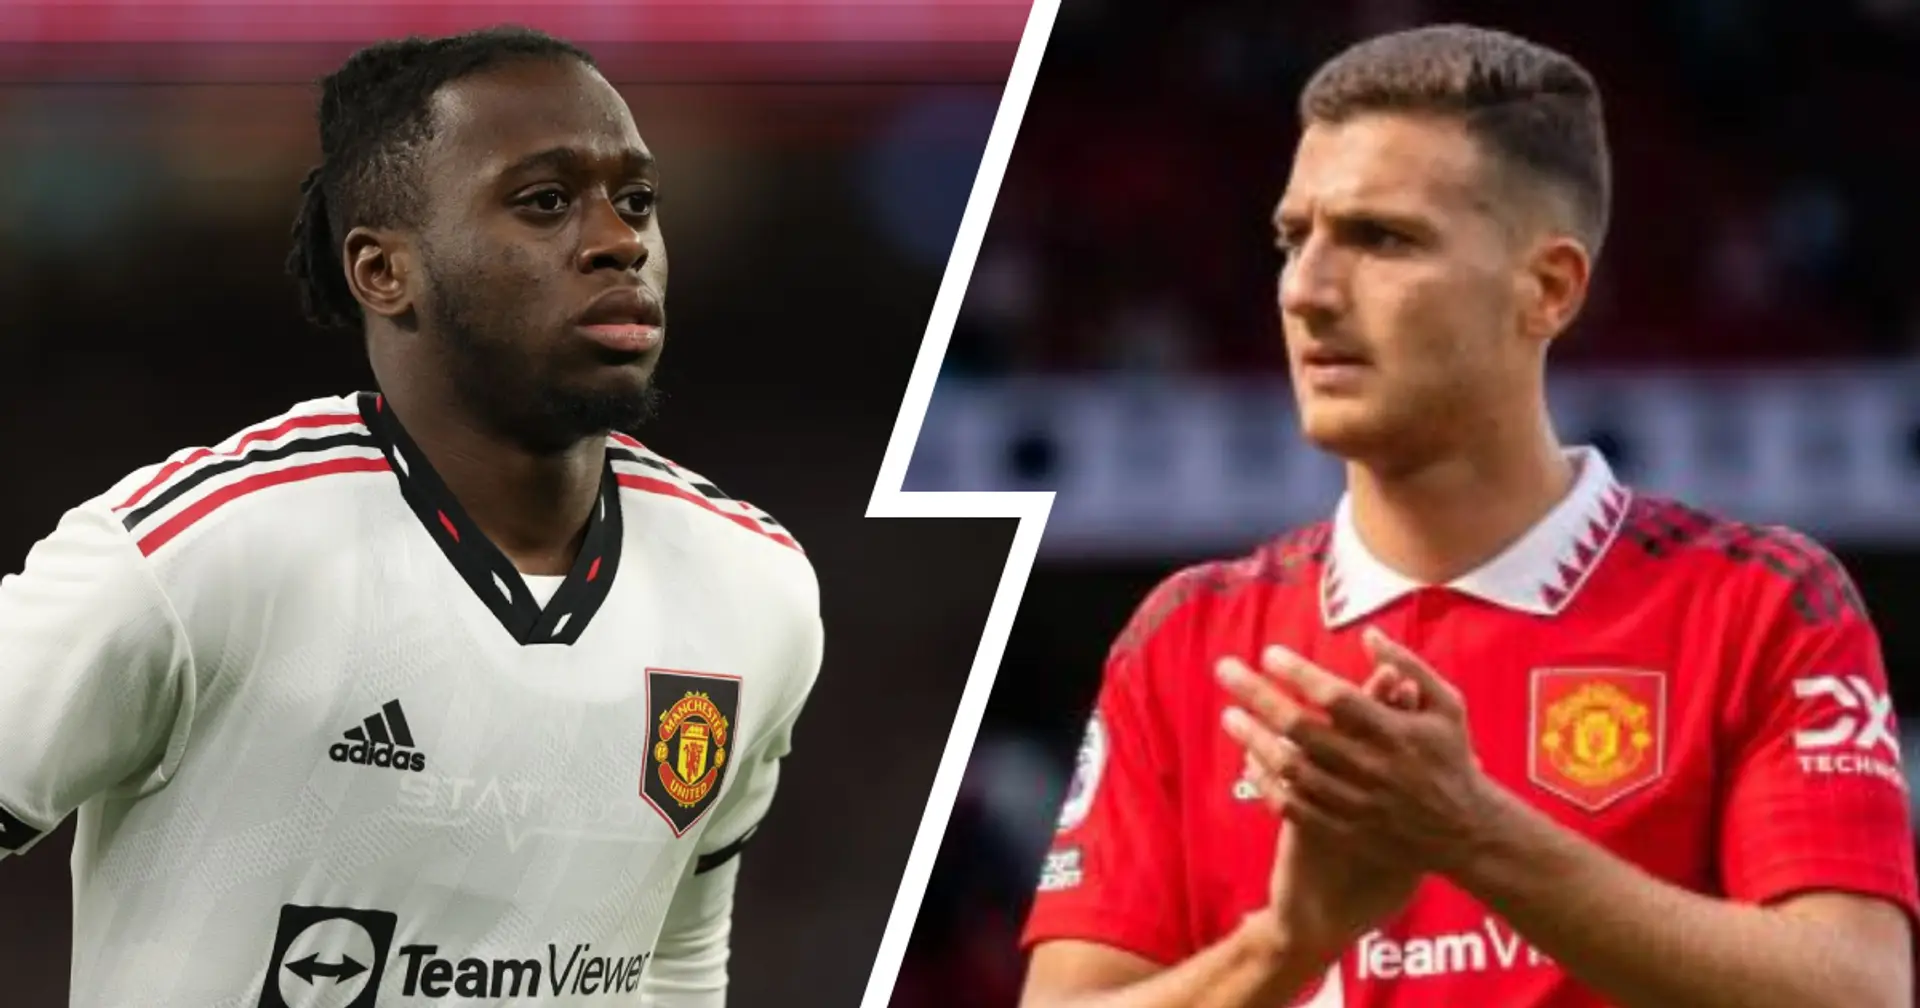 Wan-Bissaka and Dalot both attract interest from Barcelona (reliability: 5 stars)